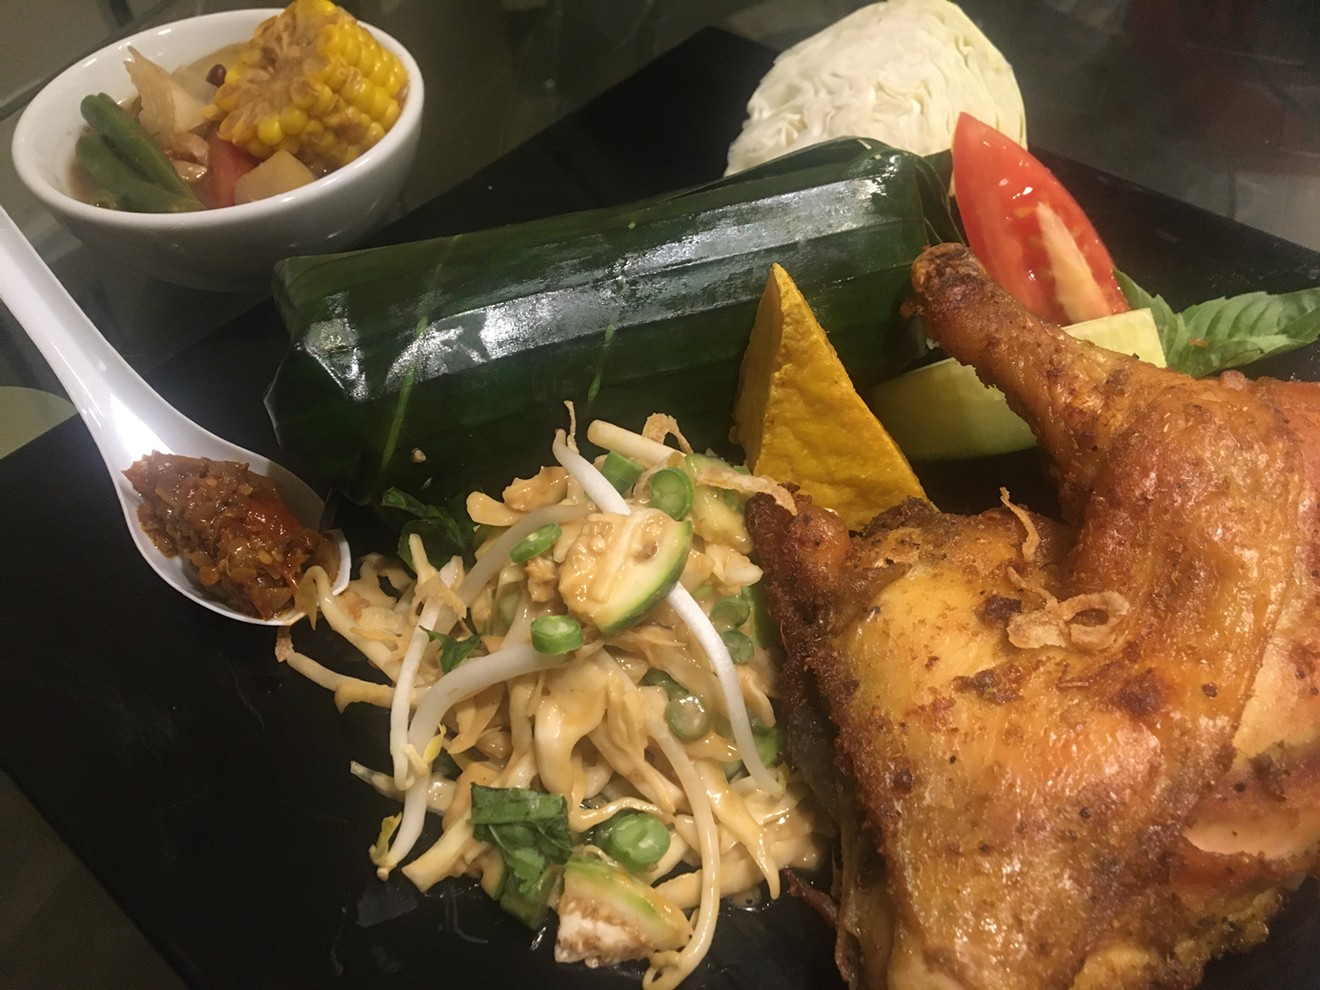 Indonesian fried chicken with rice rolled in banana leaves, fried tofu, corn fritter, lalab, karedok, tamarind soup, onion crackers and sambal